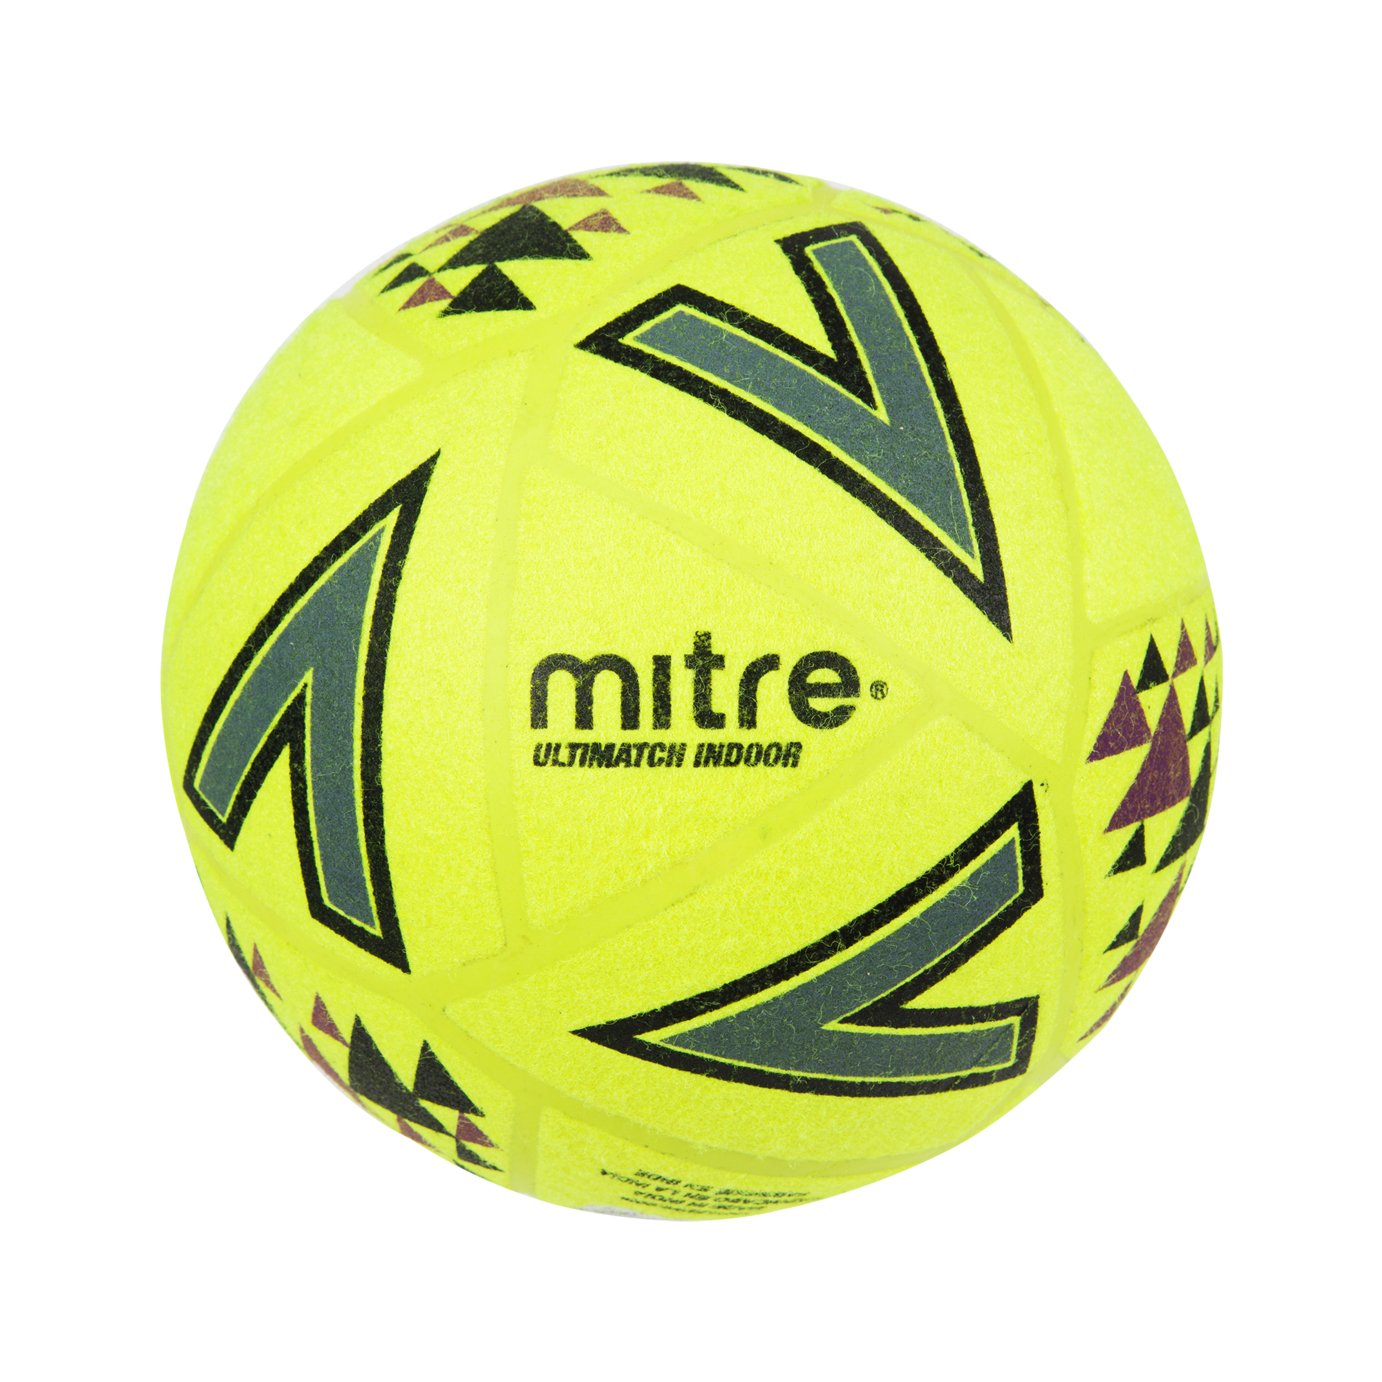 Mitre Cyclone Indoor Size 4 Football review